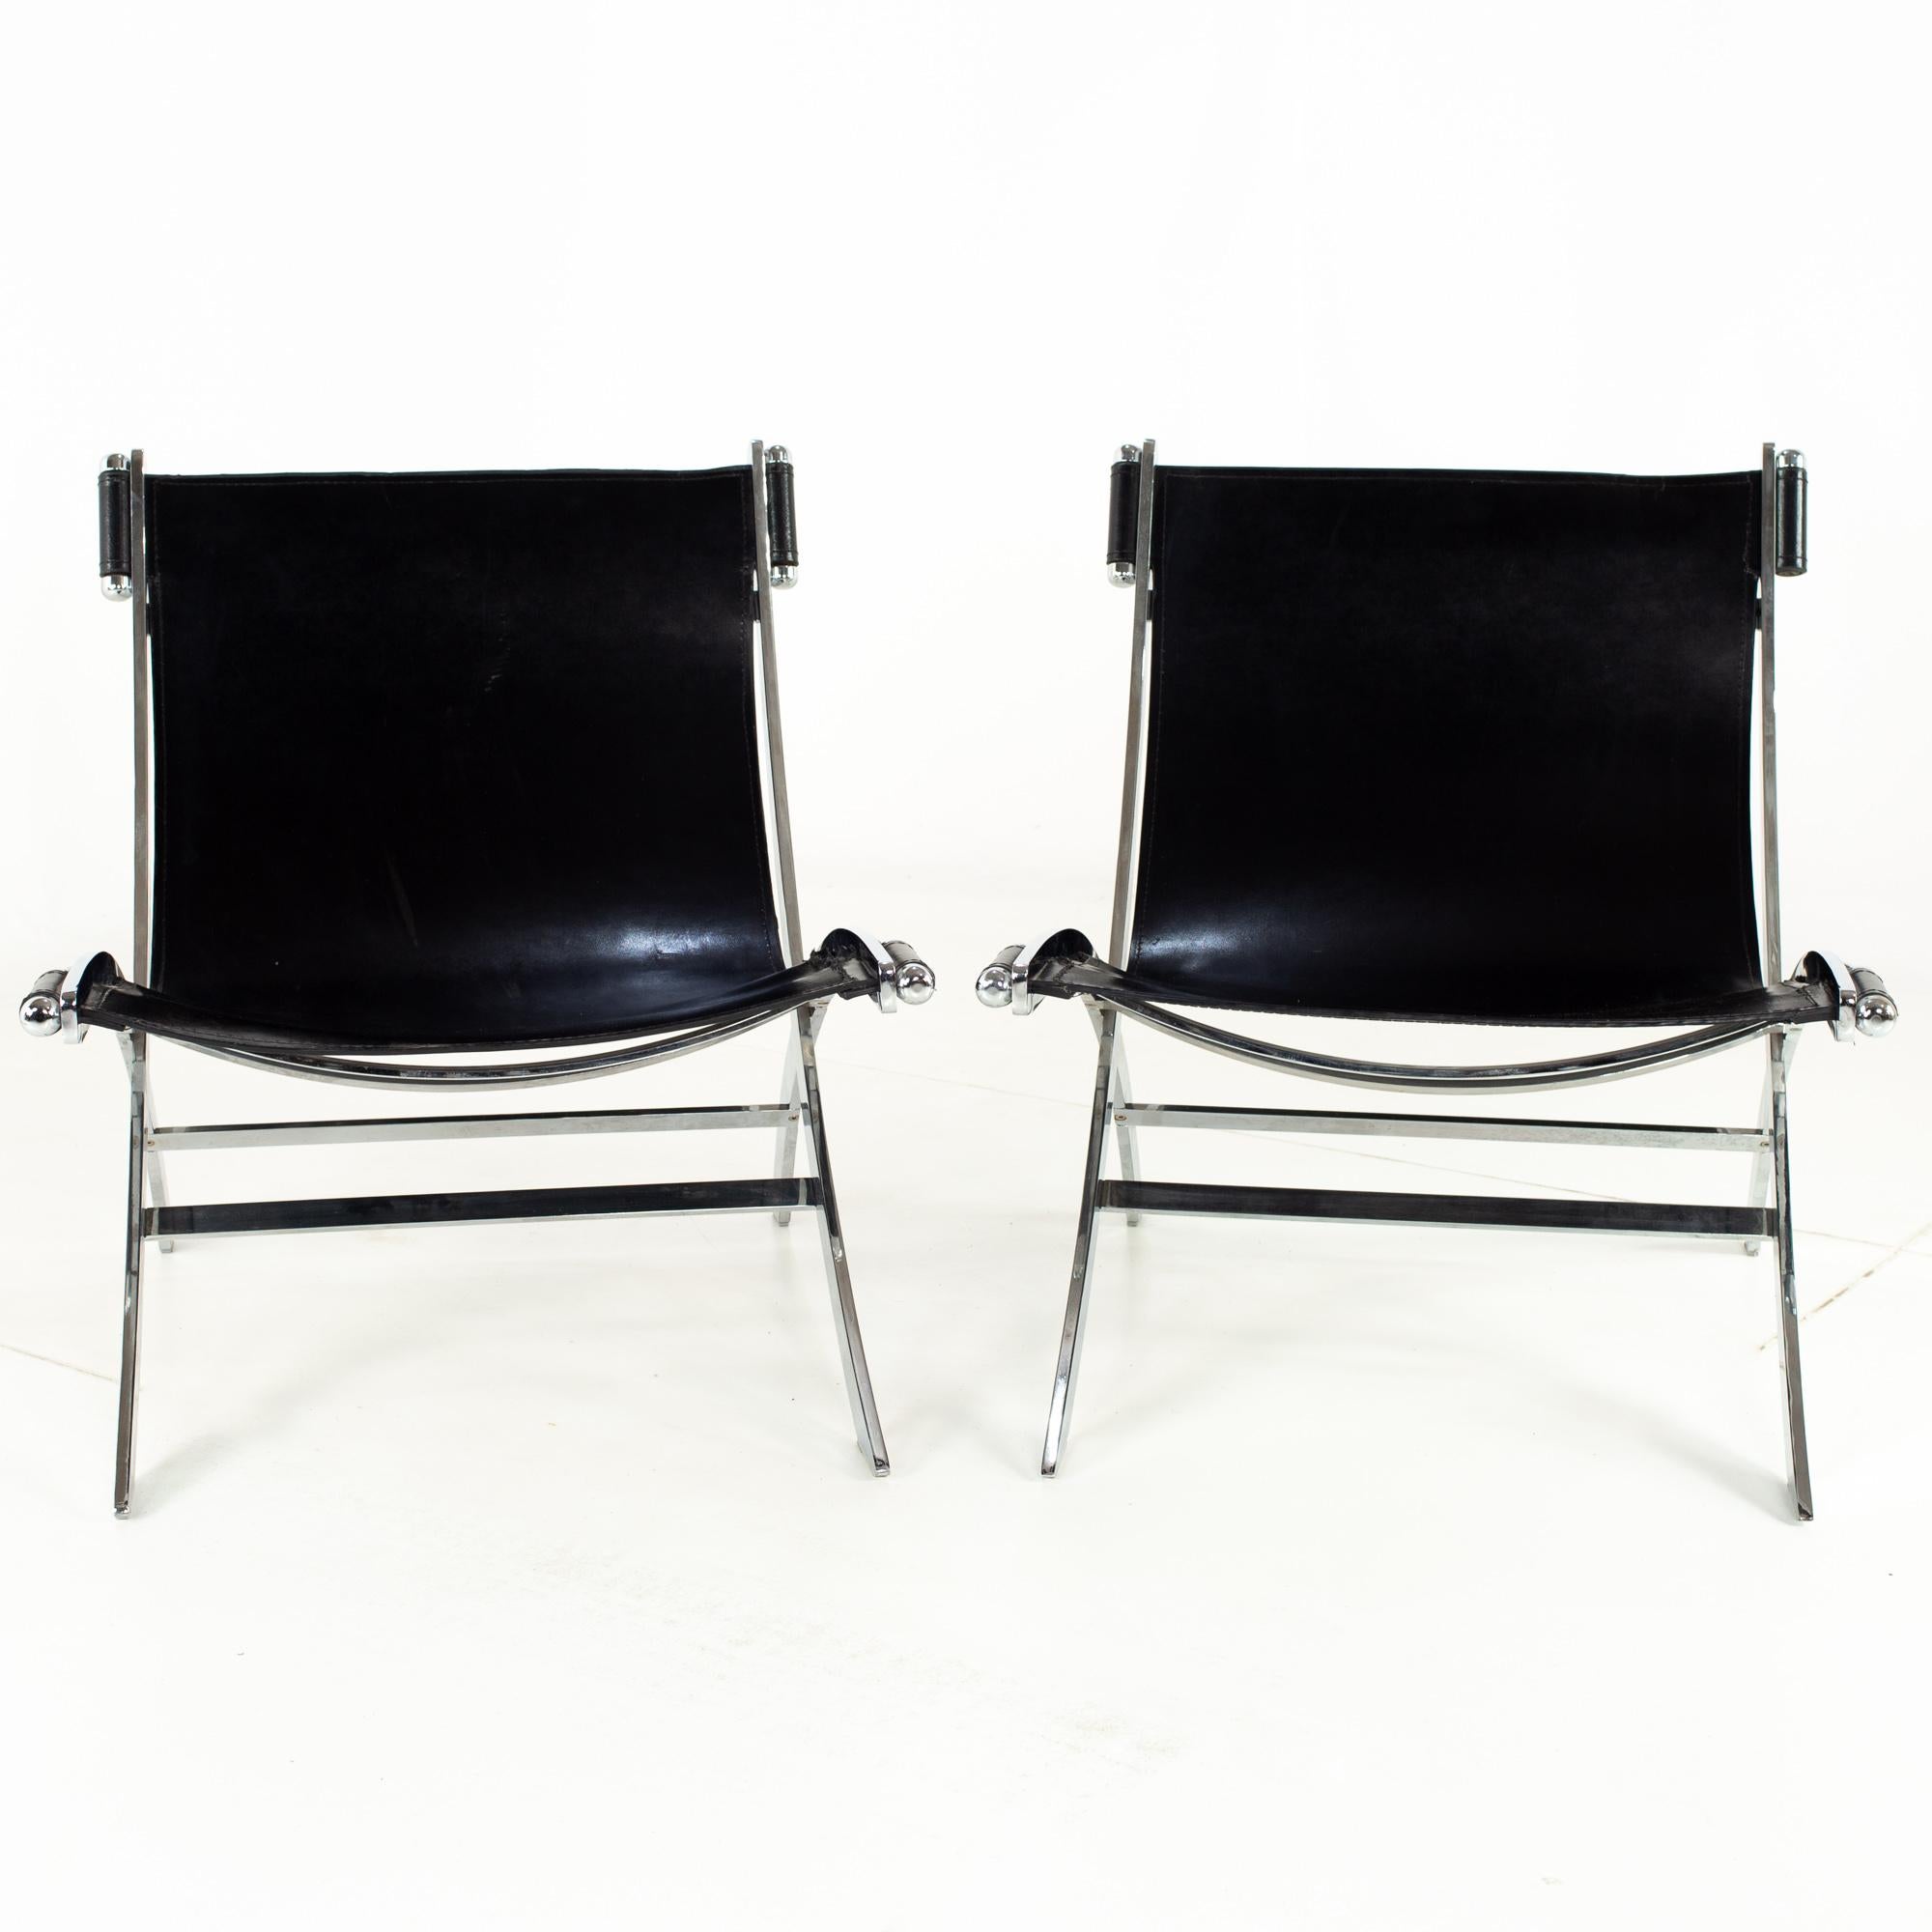 Paul Tuttle for Flexform midcentury black leather and chrome lounge chairs, pair
Each chair measures 26 wide x 30.5 deep x 30 high with a seat height of 16.5 inches
See below for 5 ways to save!
Free restoration: When you purchase a piece we